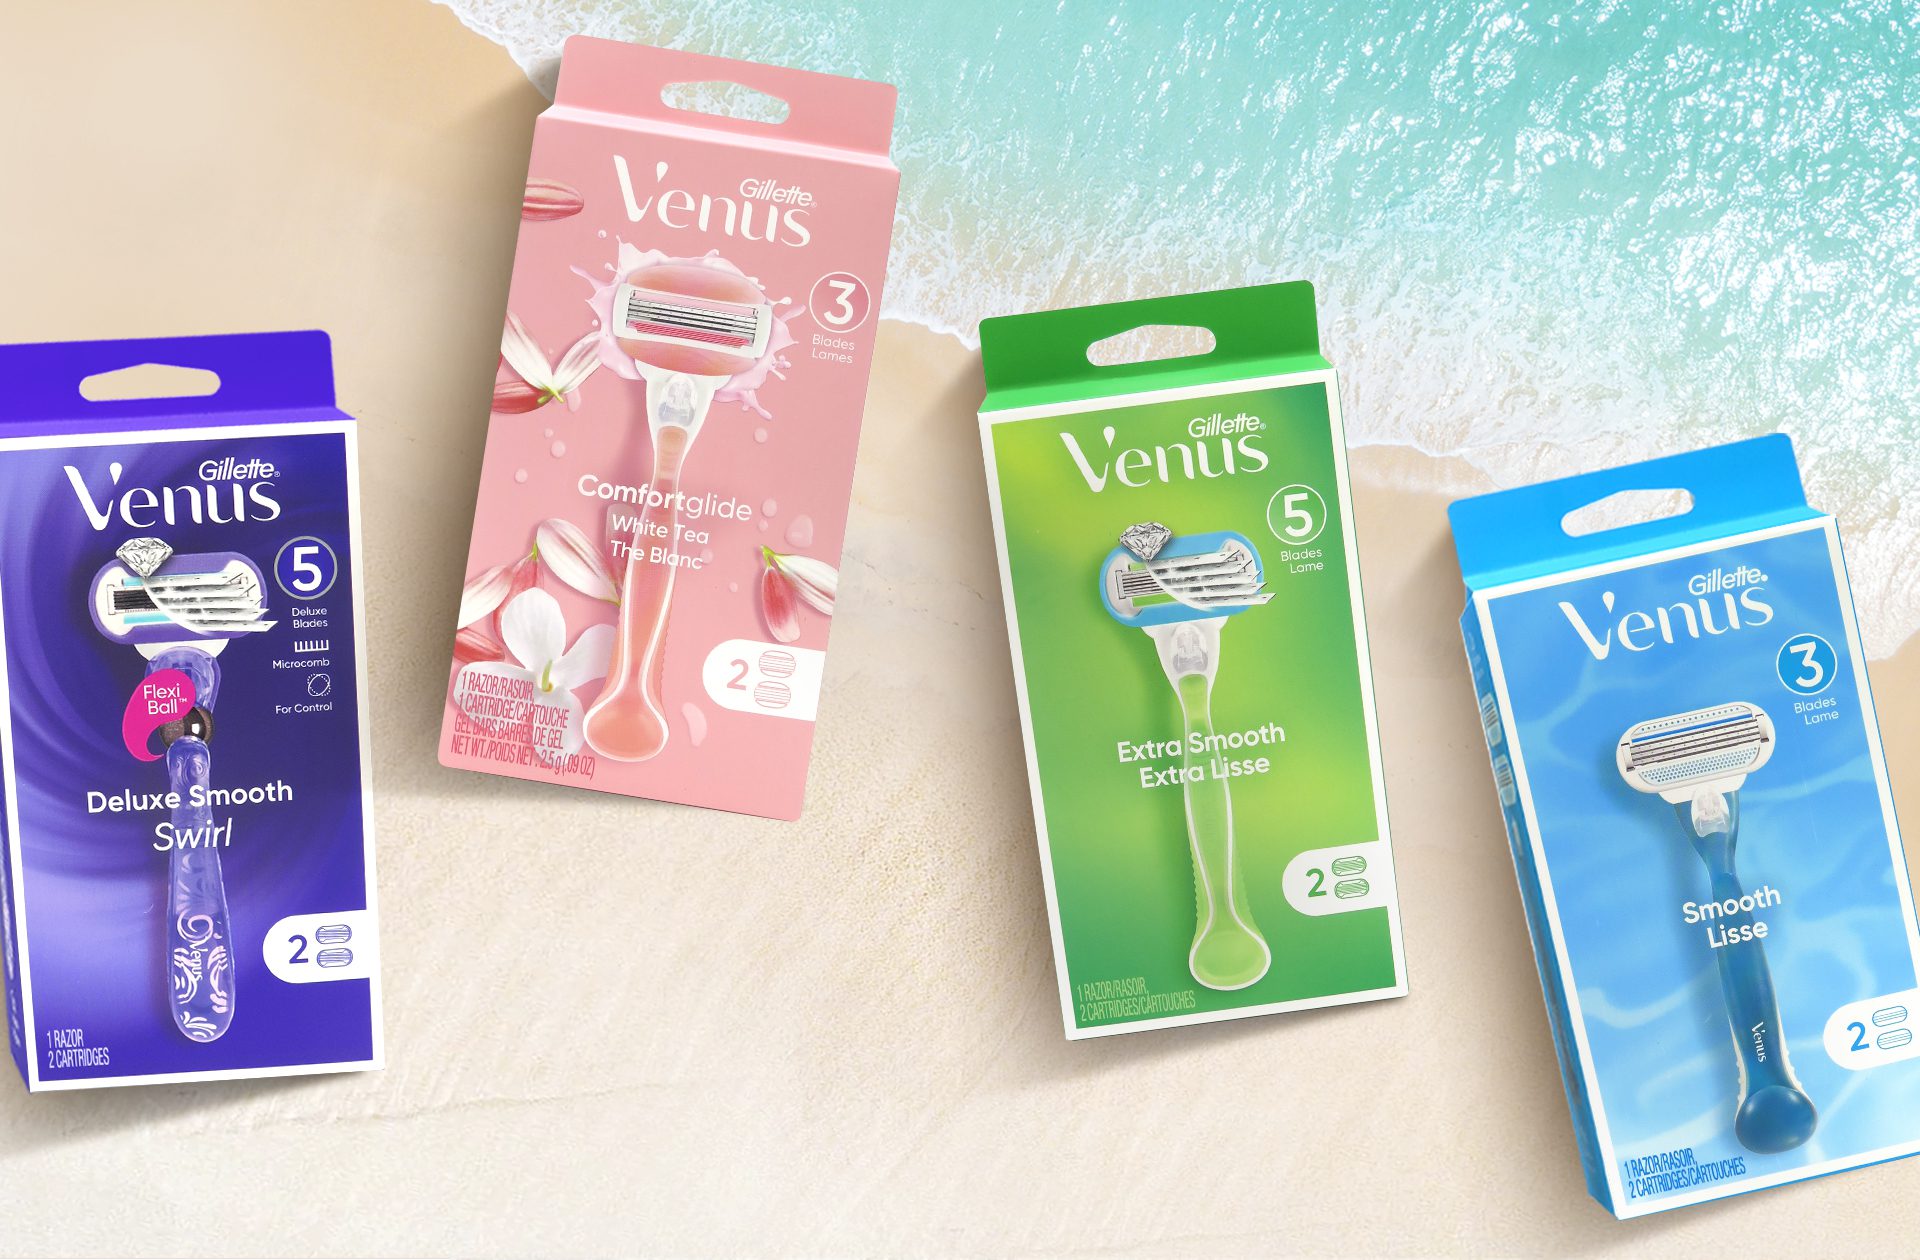 Product photography of four packs of Gillette Venus razors, showcasing packaging design services for consumer packaged goods.